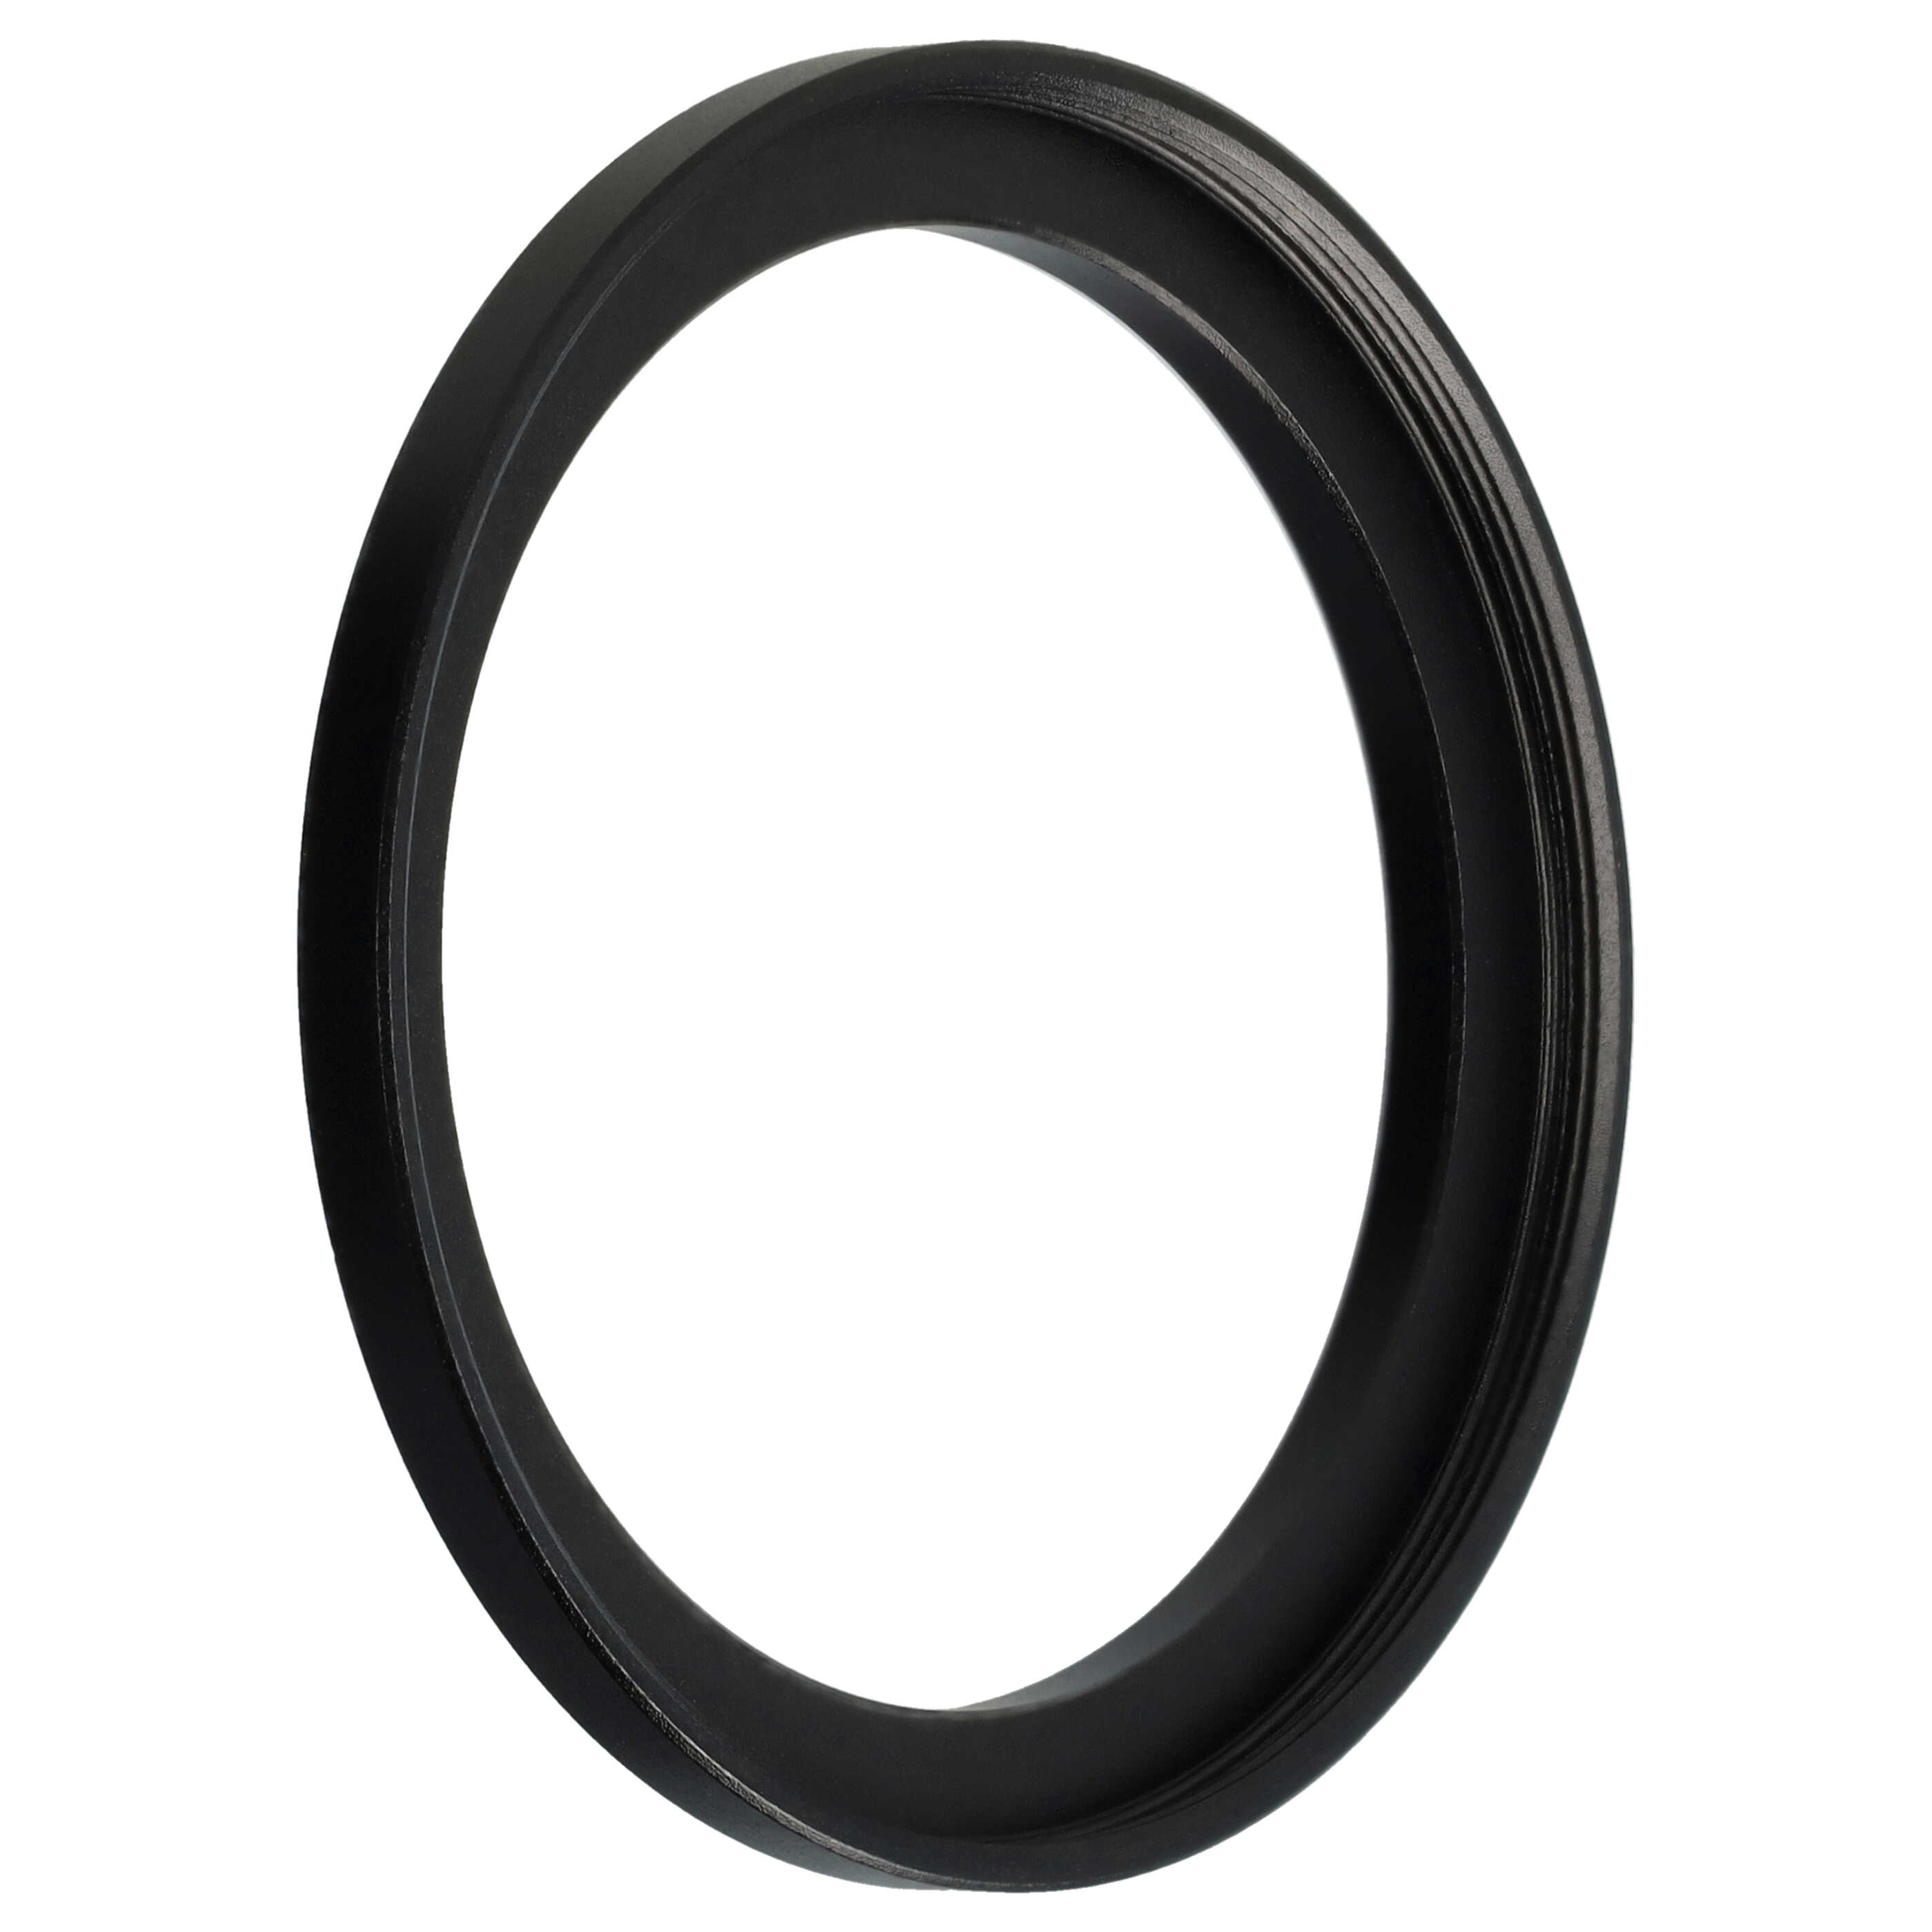 Step-Up Ring Adapter of 49 mm to 55 mmfor various Camera Lens - Filter Adapter